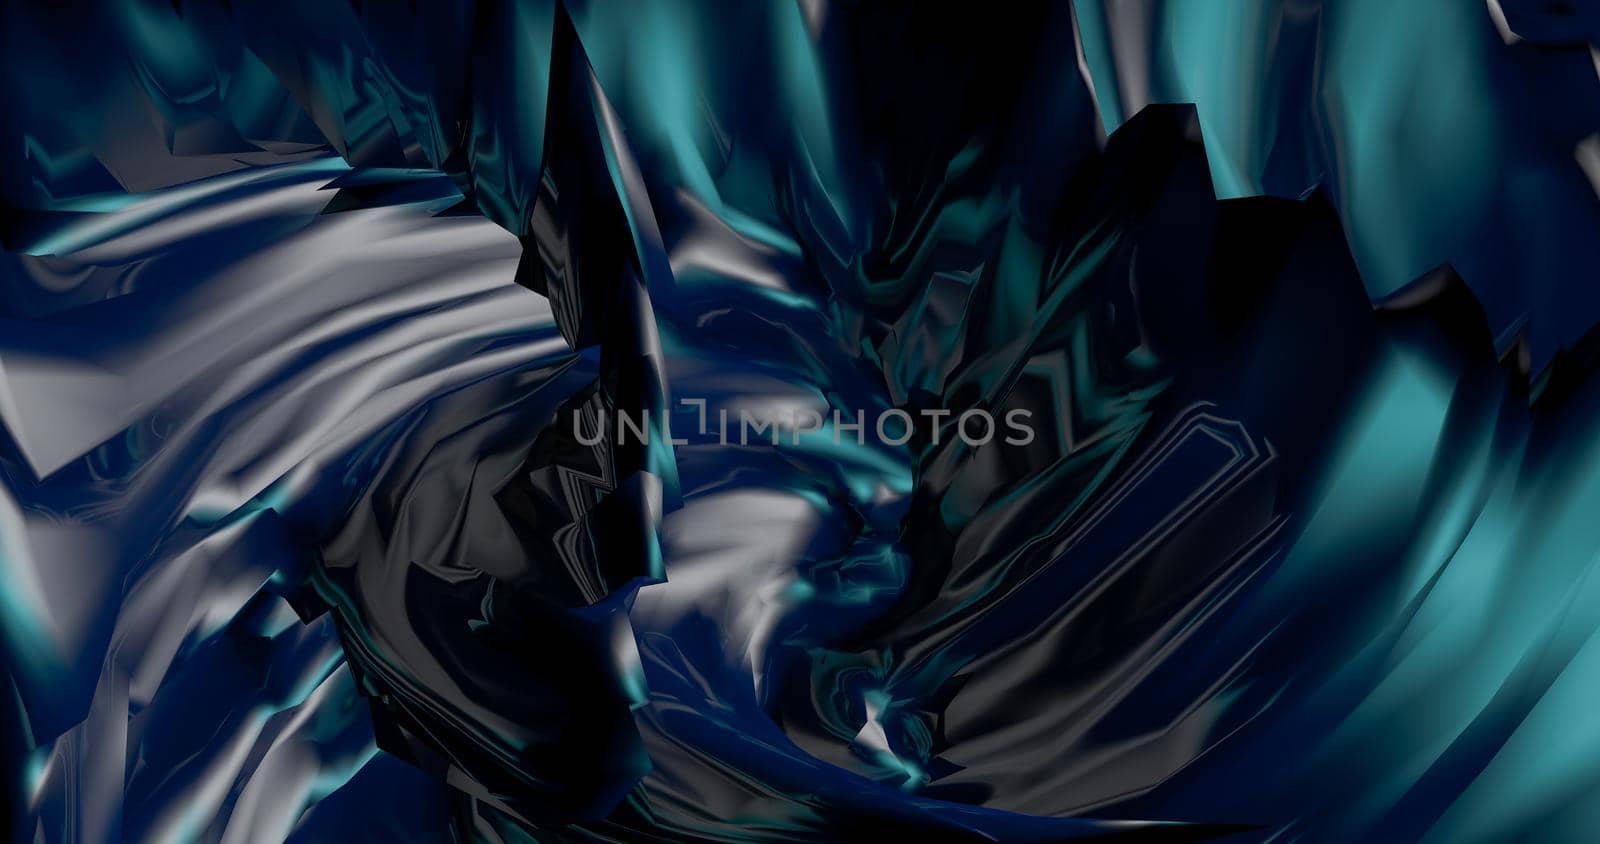 Abstract black background with dynamic blue 3d lines. blue and black lines. Modern trendy banner or poster design 3D image, copy space.